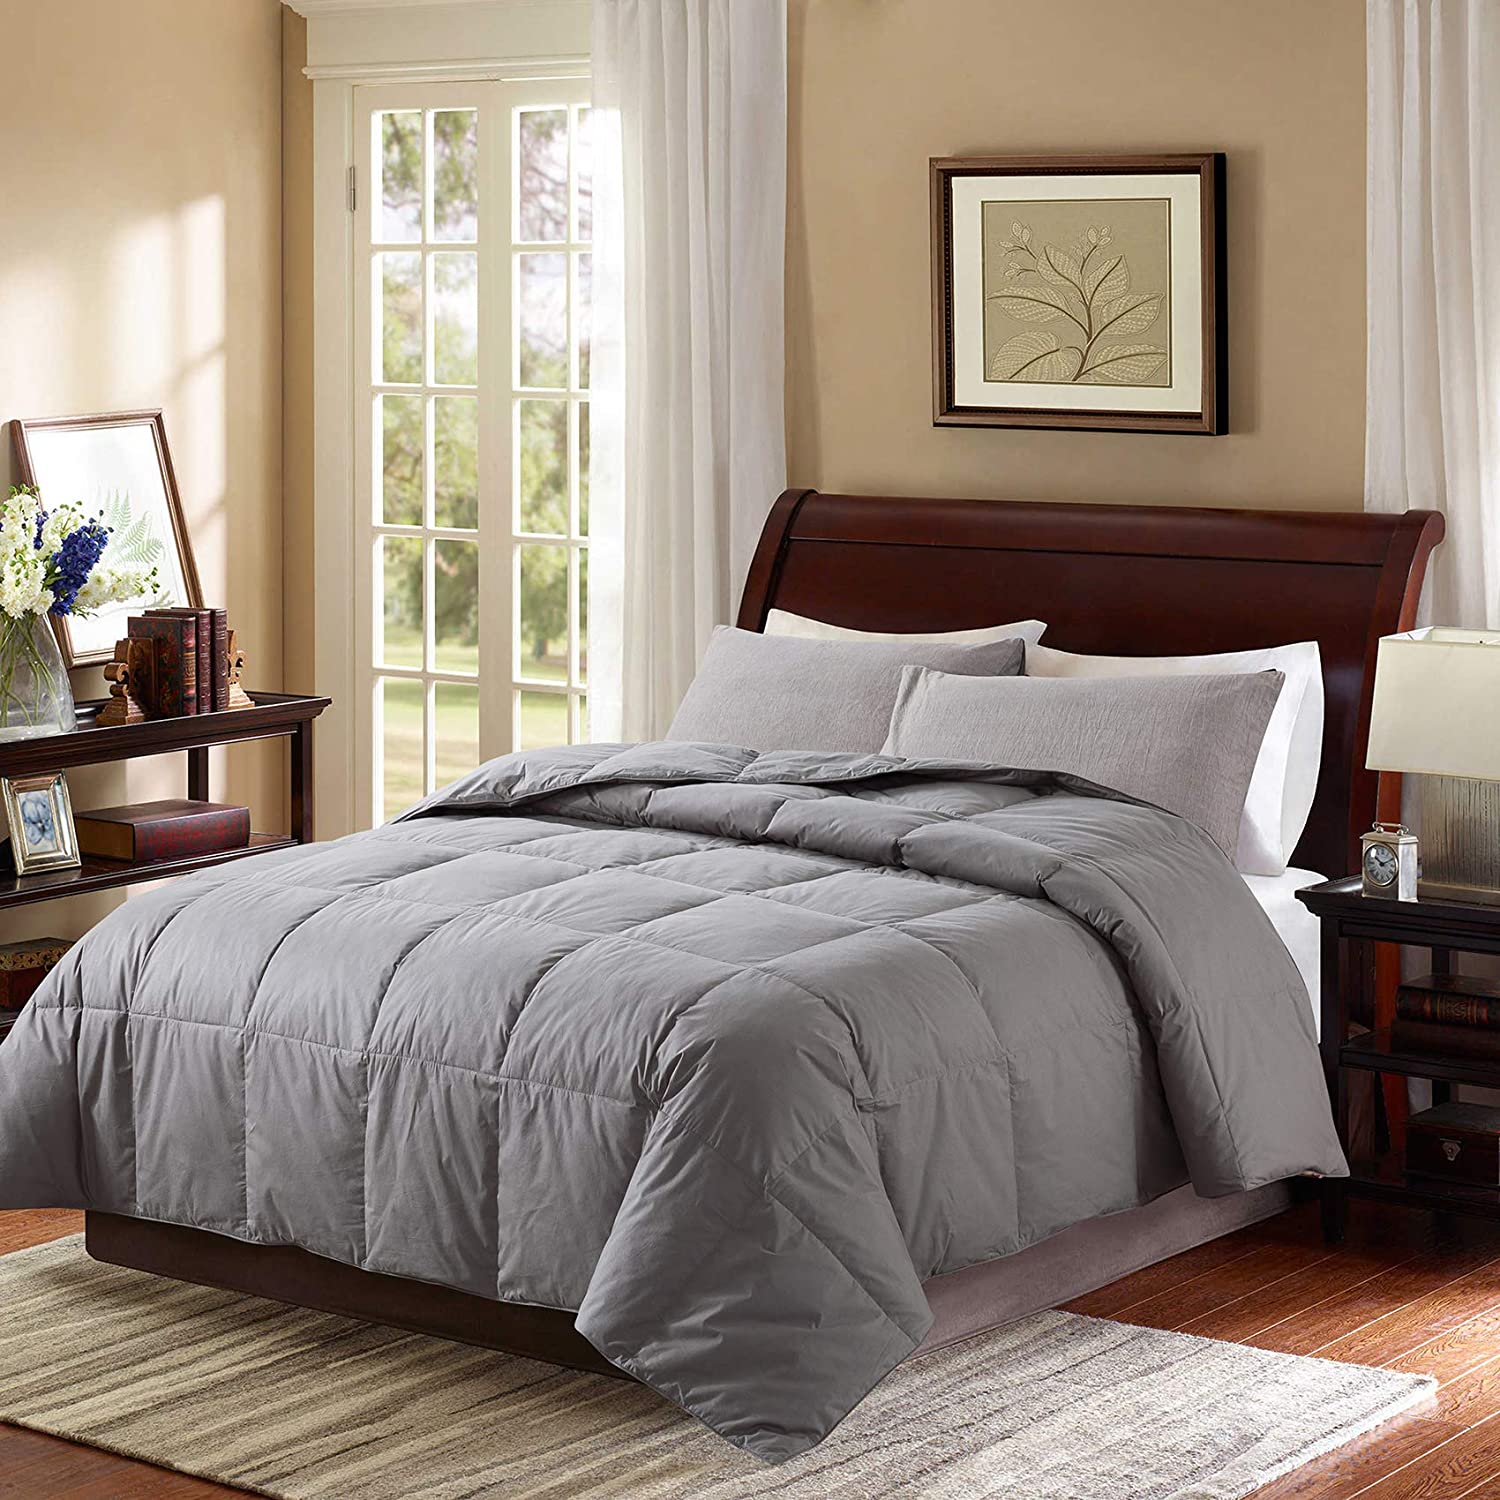 Details about   Ubauba All-Season Queen Down Comforter 100% Cotton Quilted Feather Comforter wit 